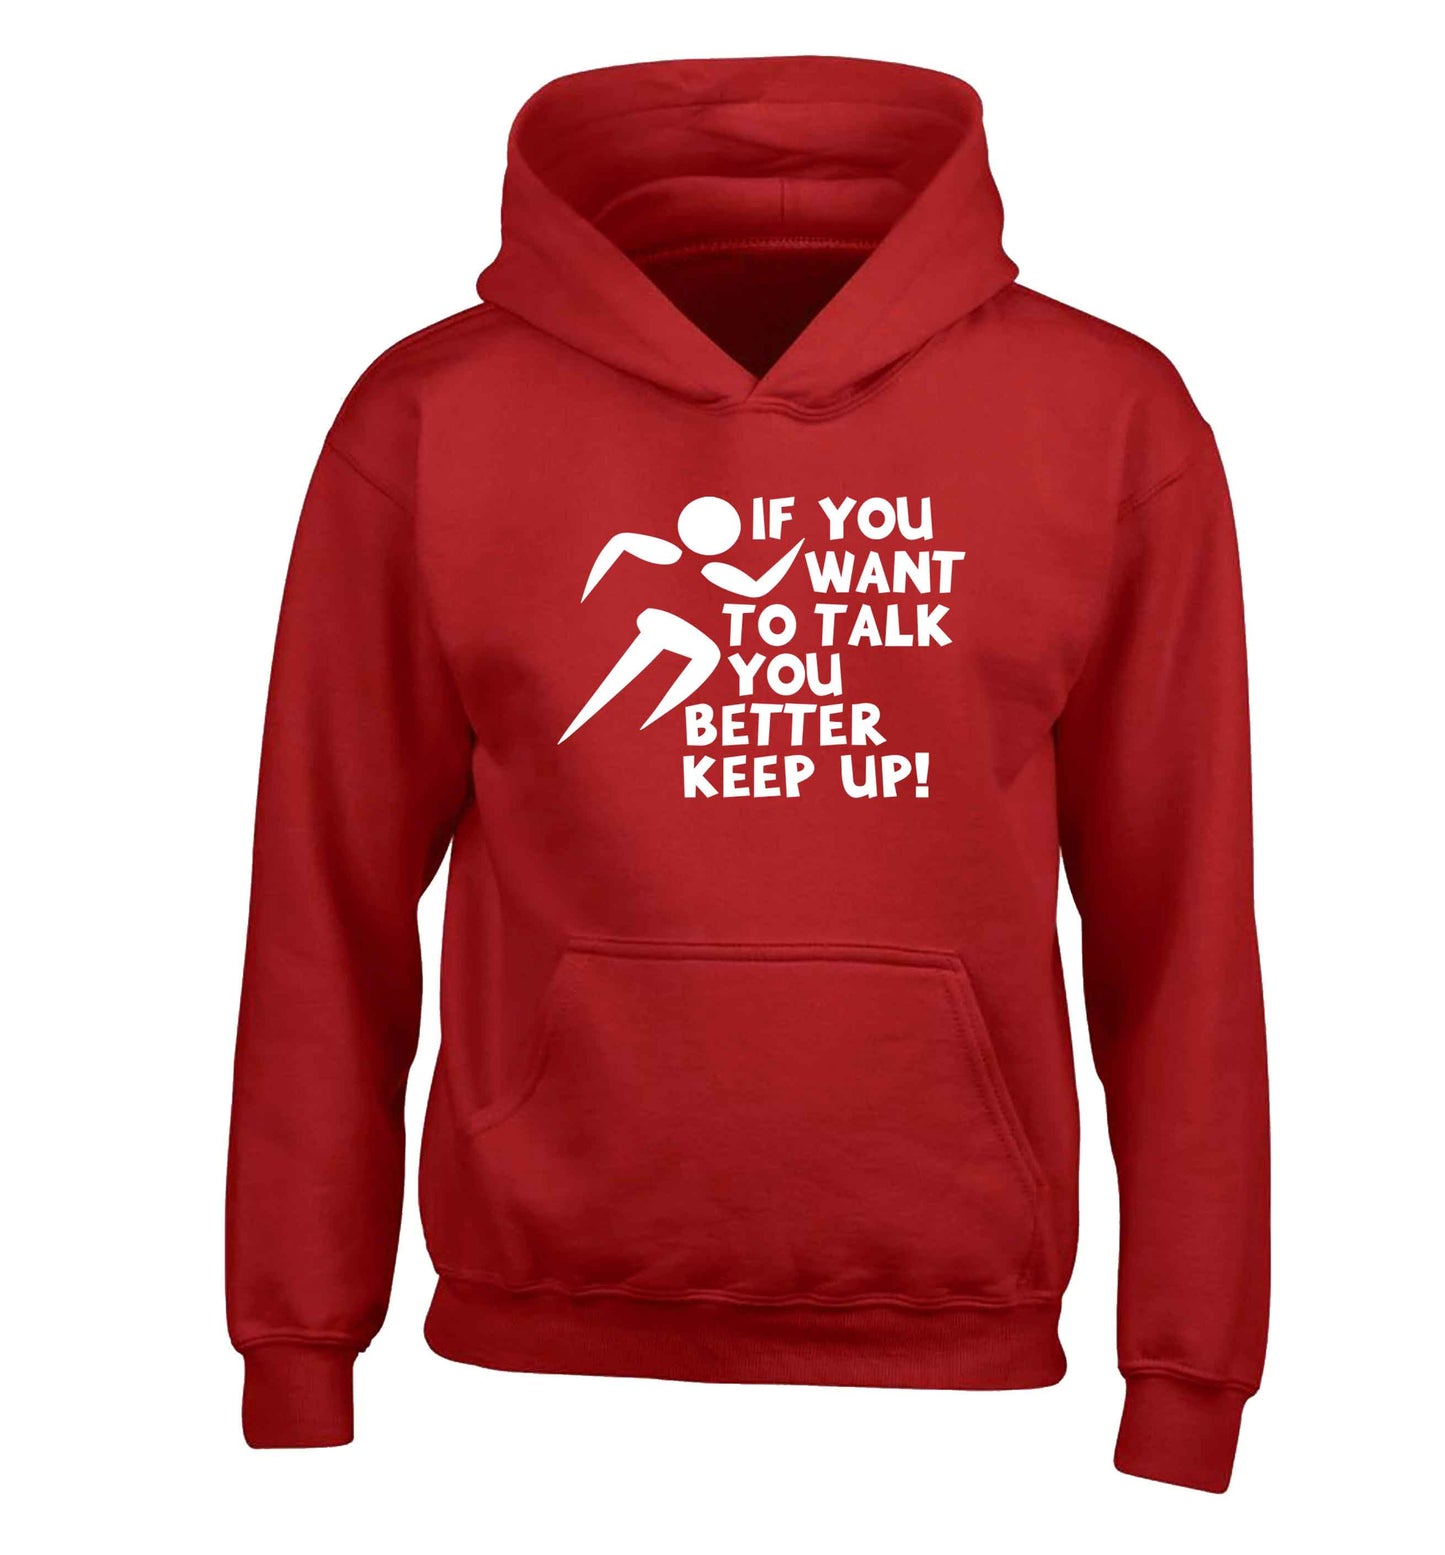 If you want to talk you better keep up! children's red hoodie 12-13 Years